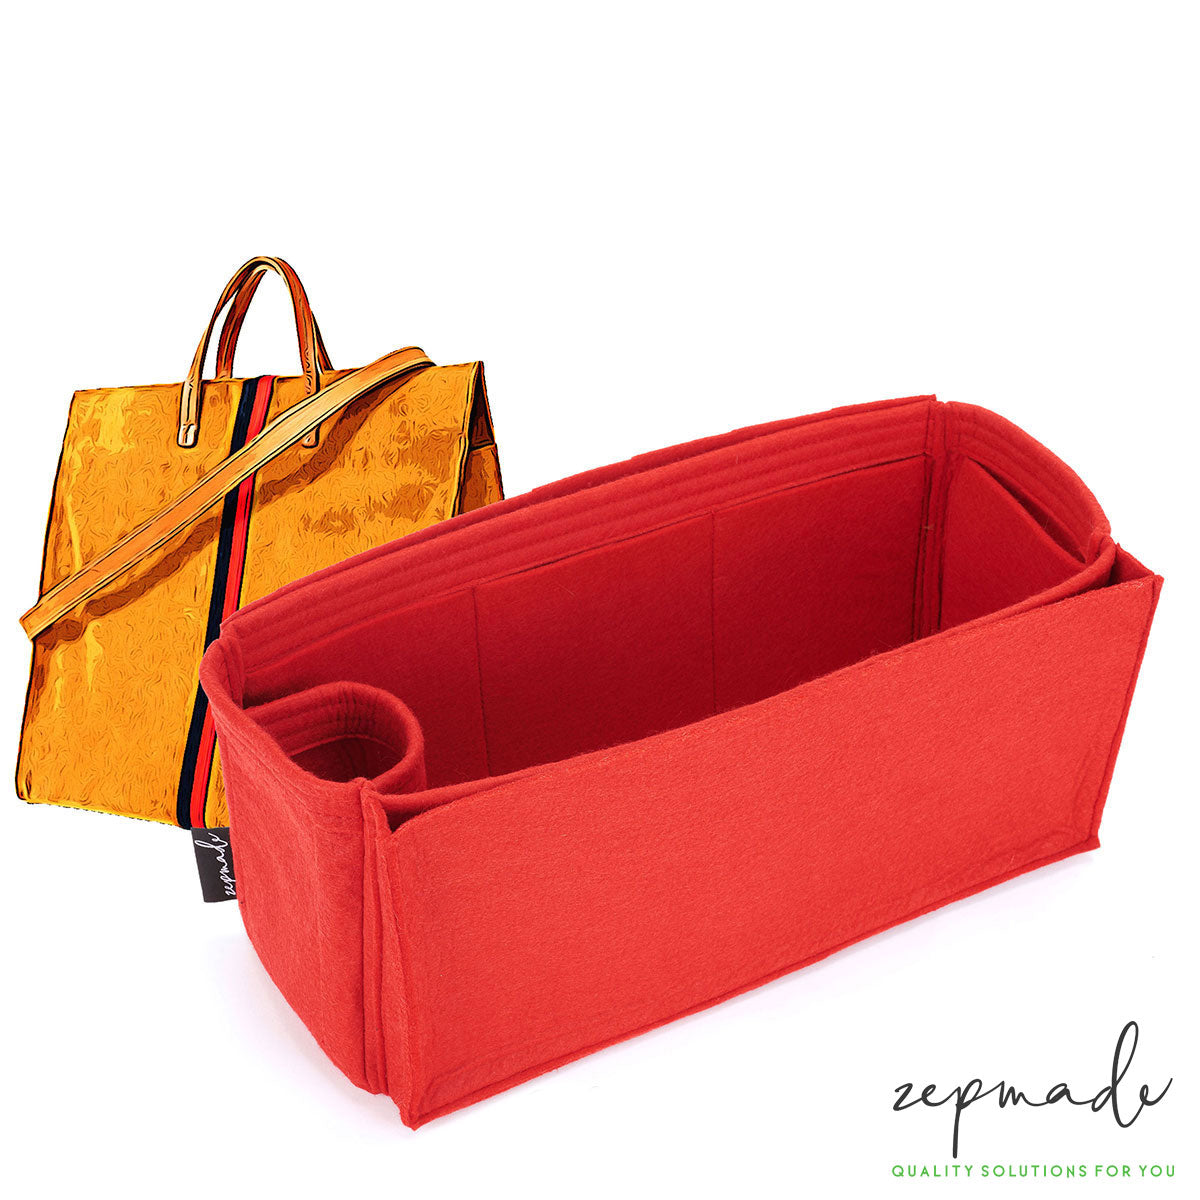 Clare V. Simple Tote Organizer Insert, Bag Organizer with Laptop Compa -  Zepmade